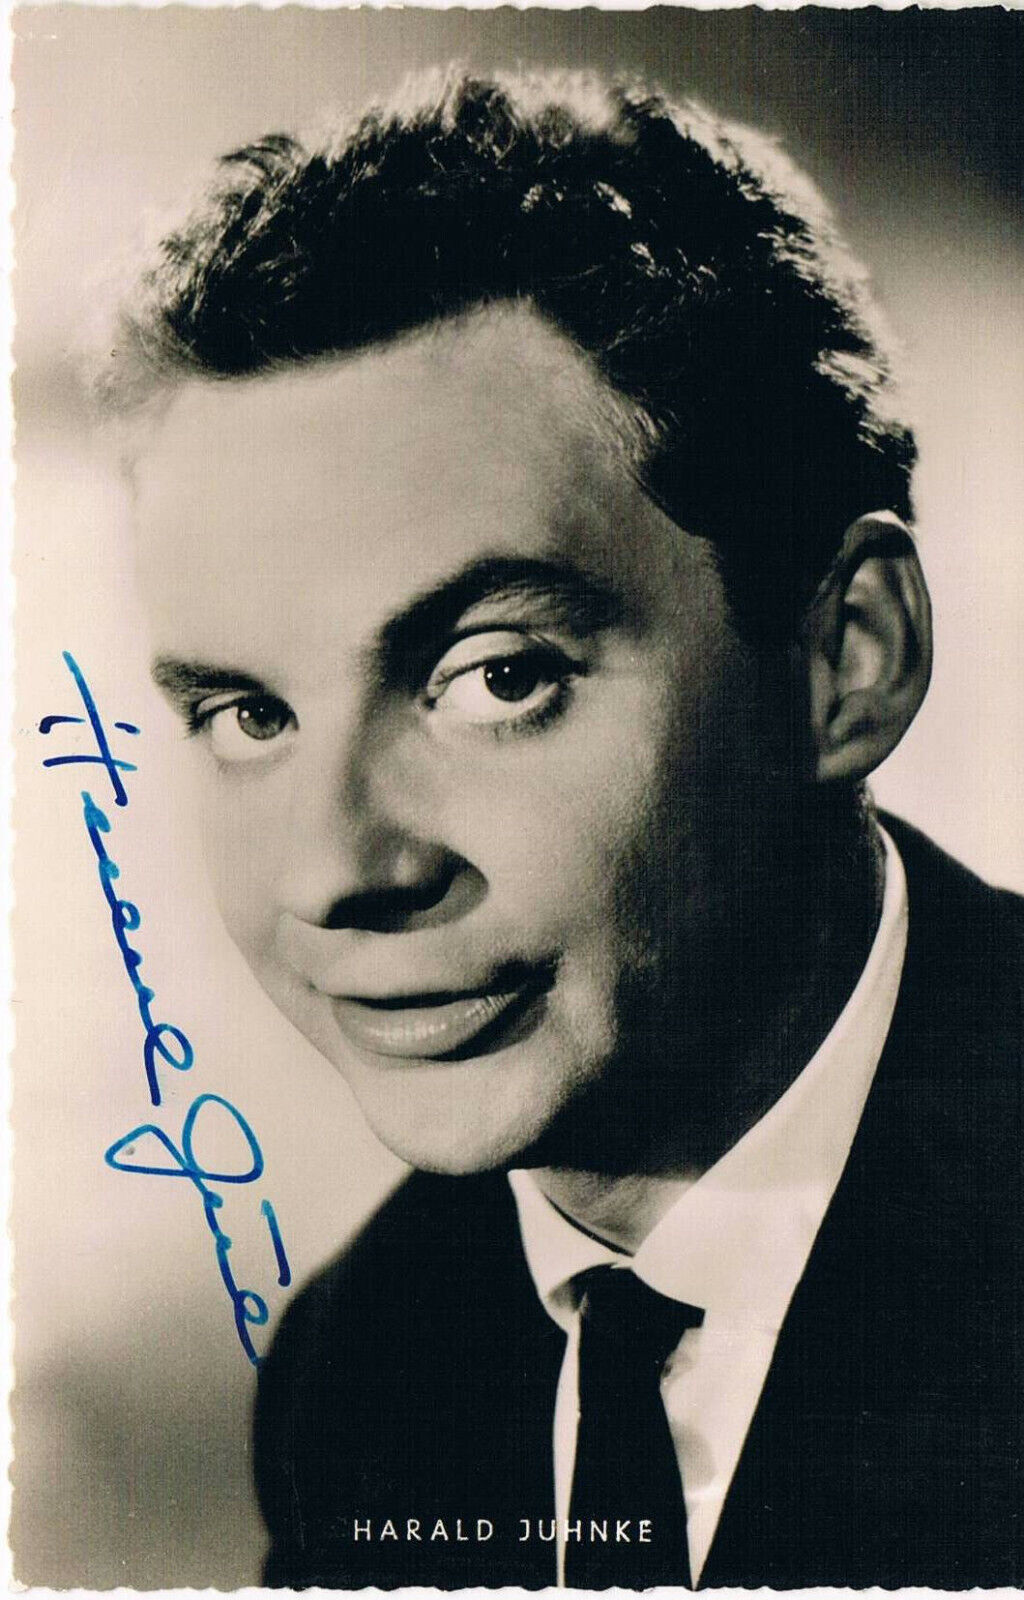 Harald Juhnke 1929-2005 autograph signed postcard Photo Poster painting 3.5x5.5 German actor